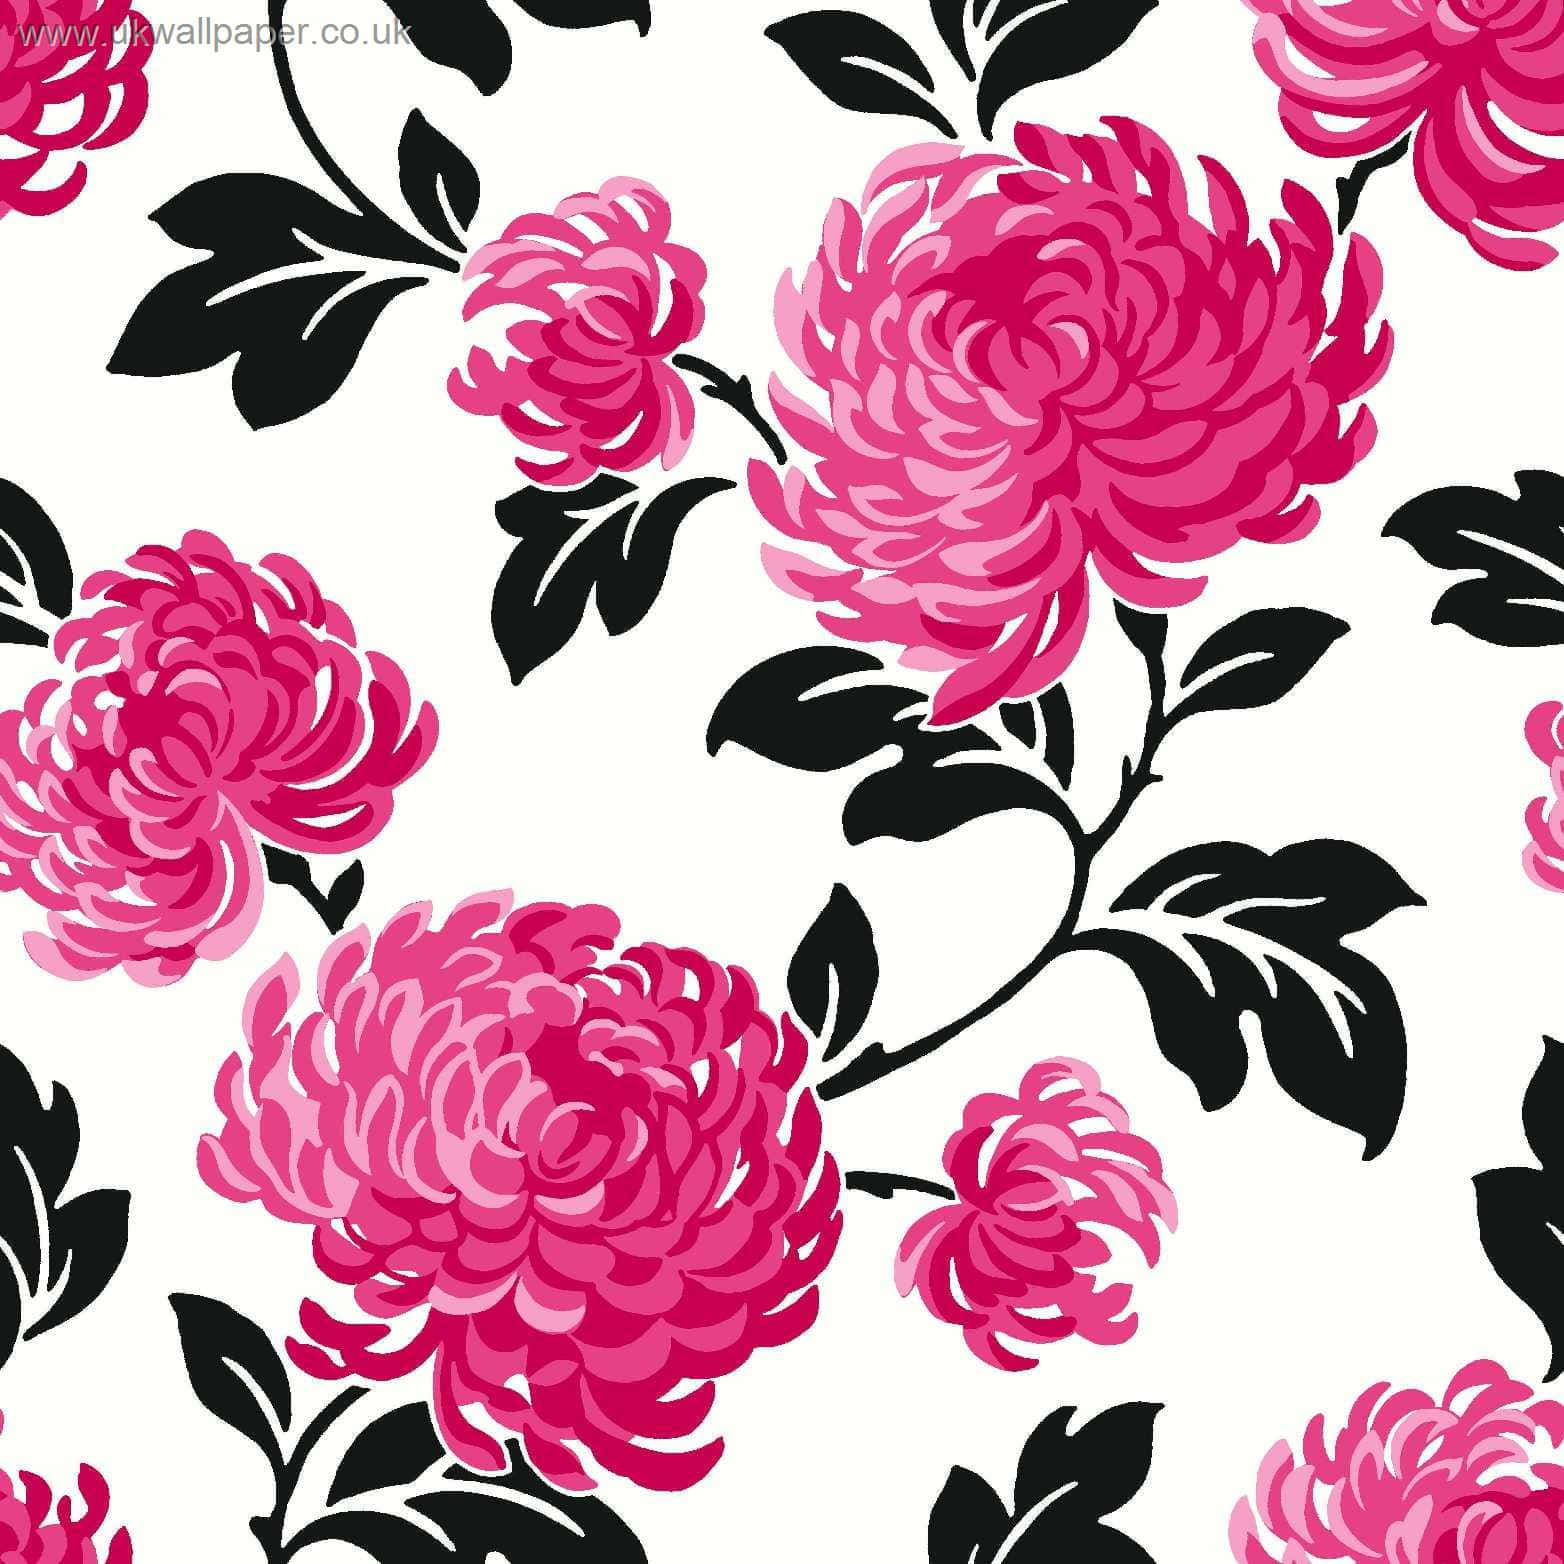 Vibrant Geometric Pattern with Eye-Catching Pink, Black and White Wallpaper